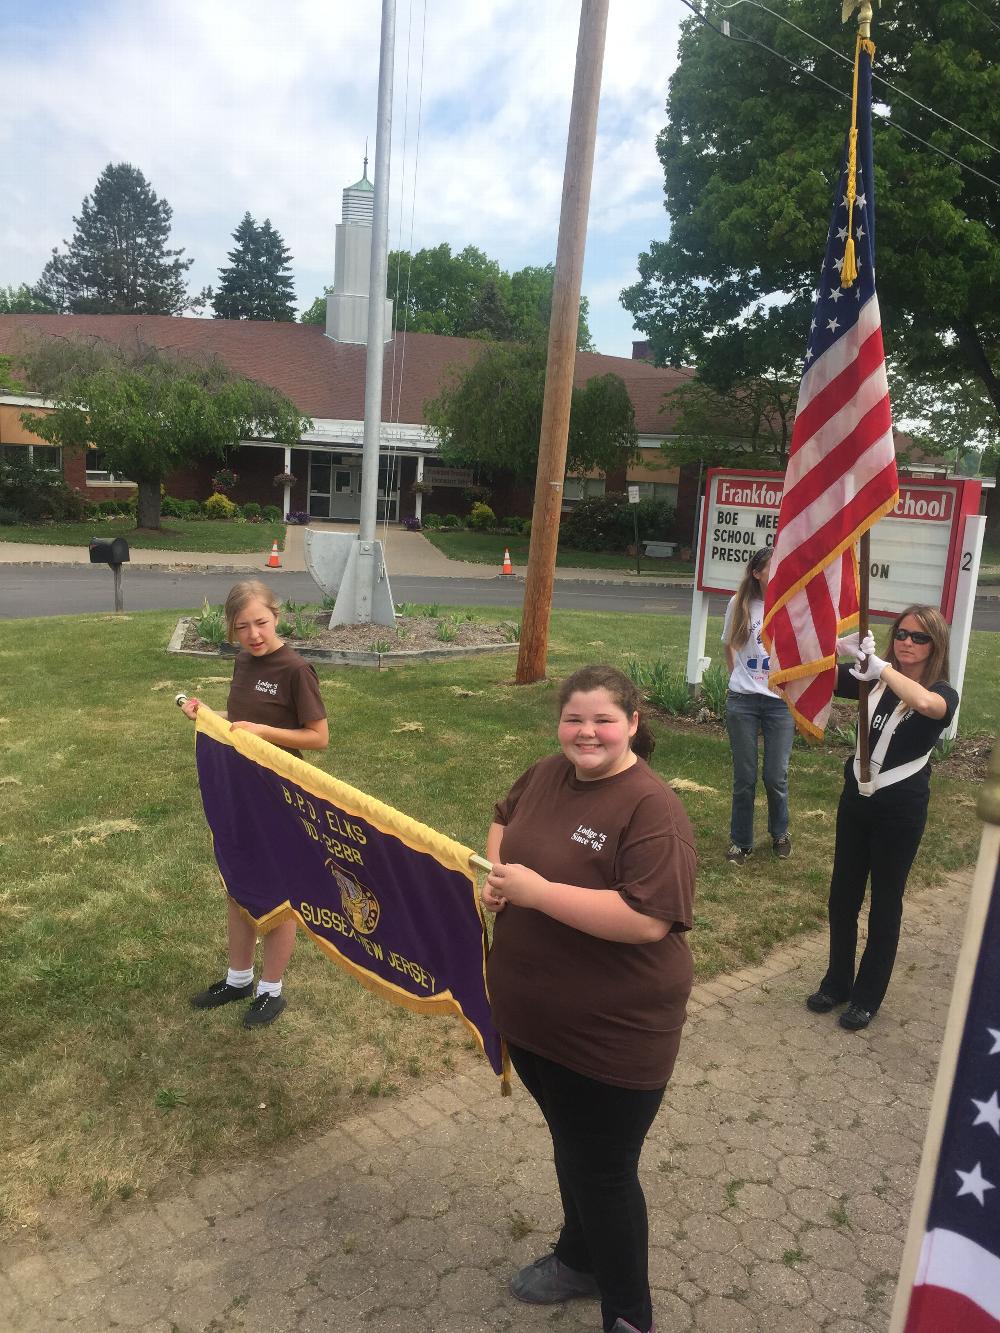 Sussex Antlers 5 Members carrying the lodge Banner
Branchville Memorial Day Parade
May 2015